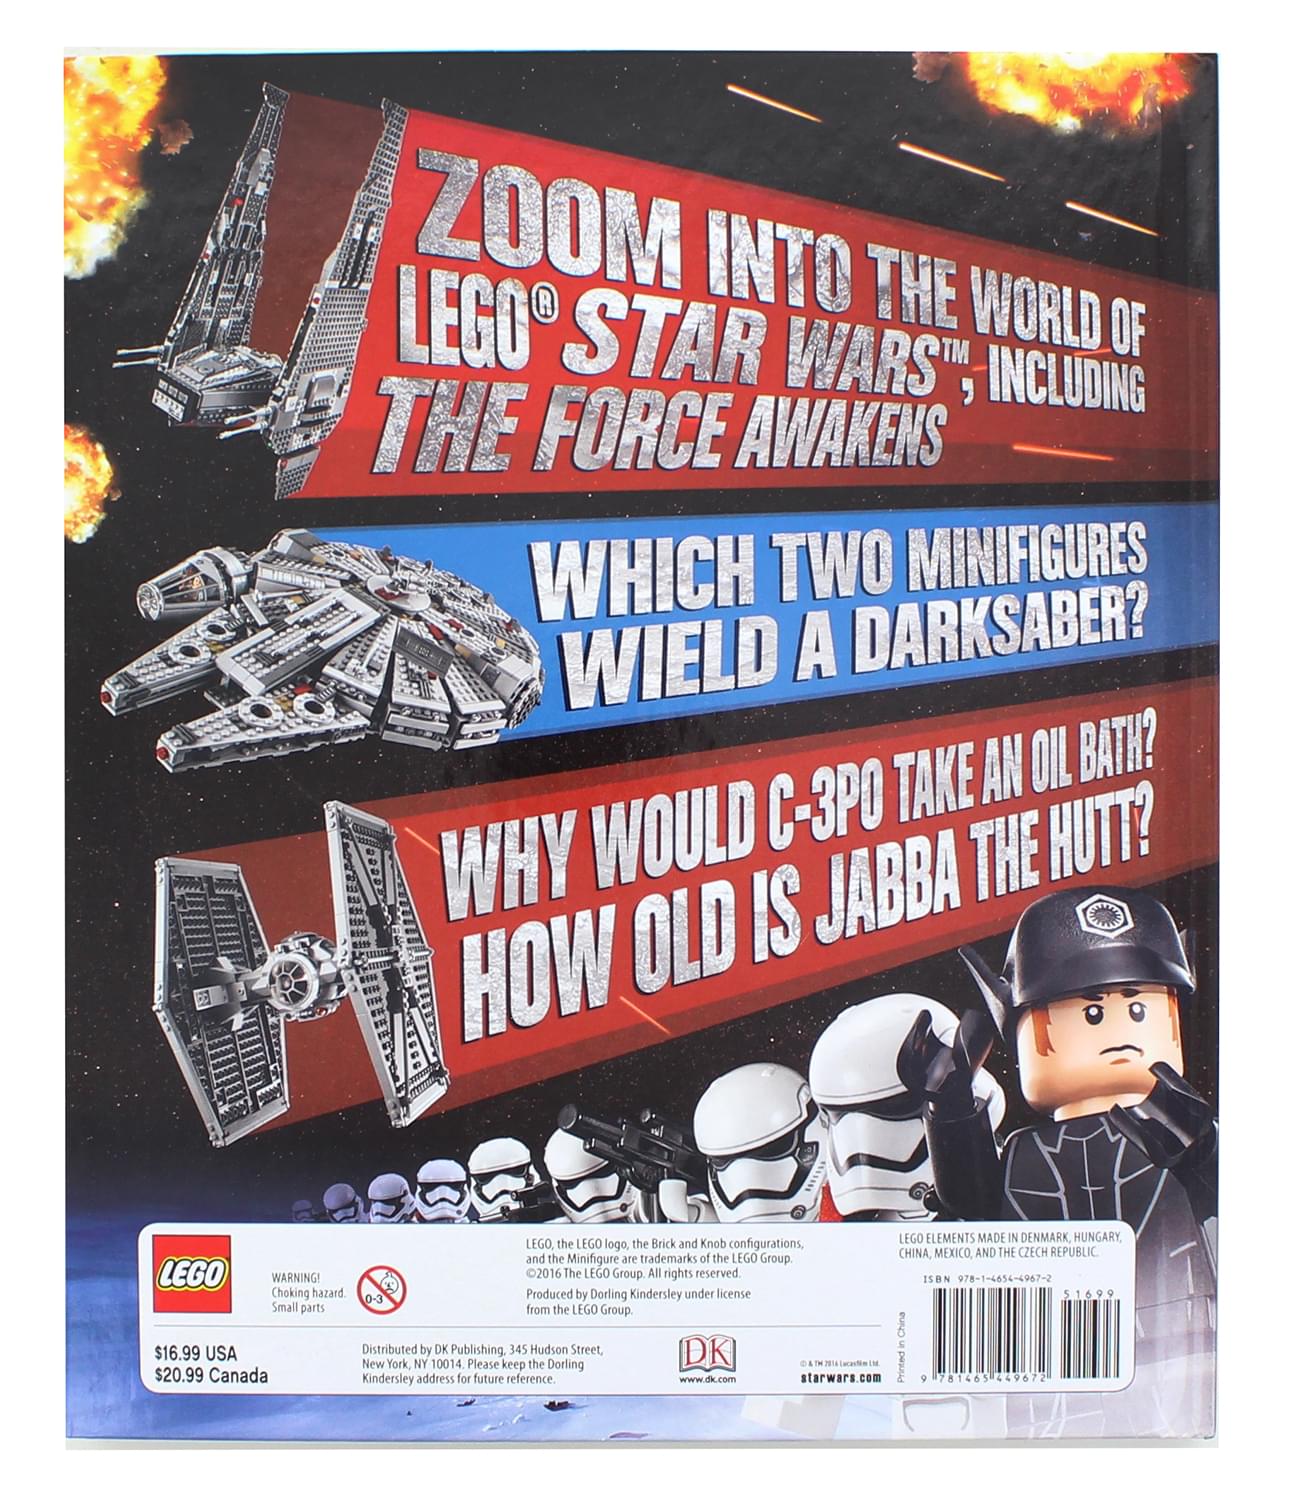 LEGO Star Wars Chronicles of the Force Hardcover Book